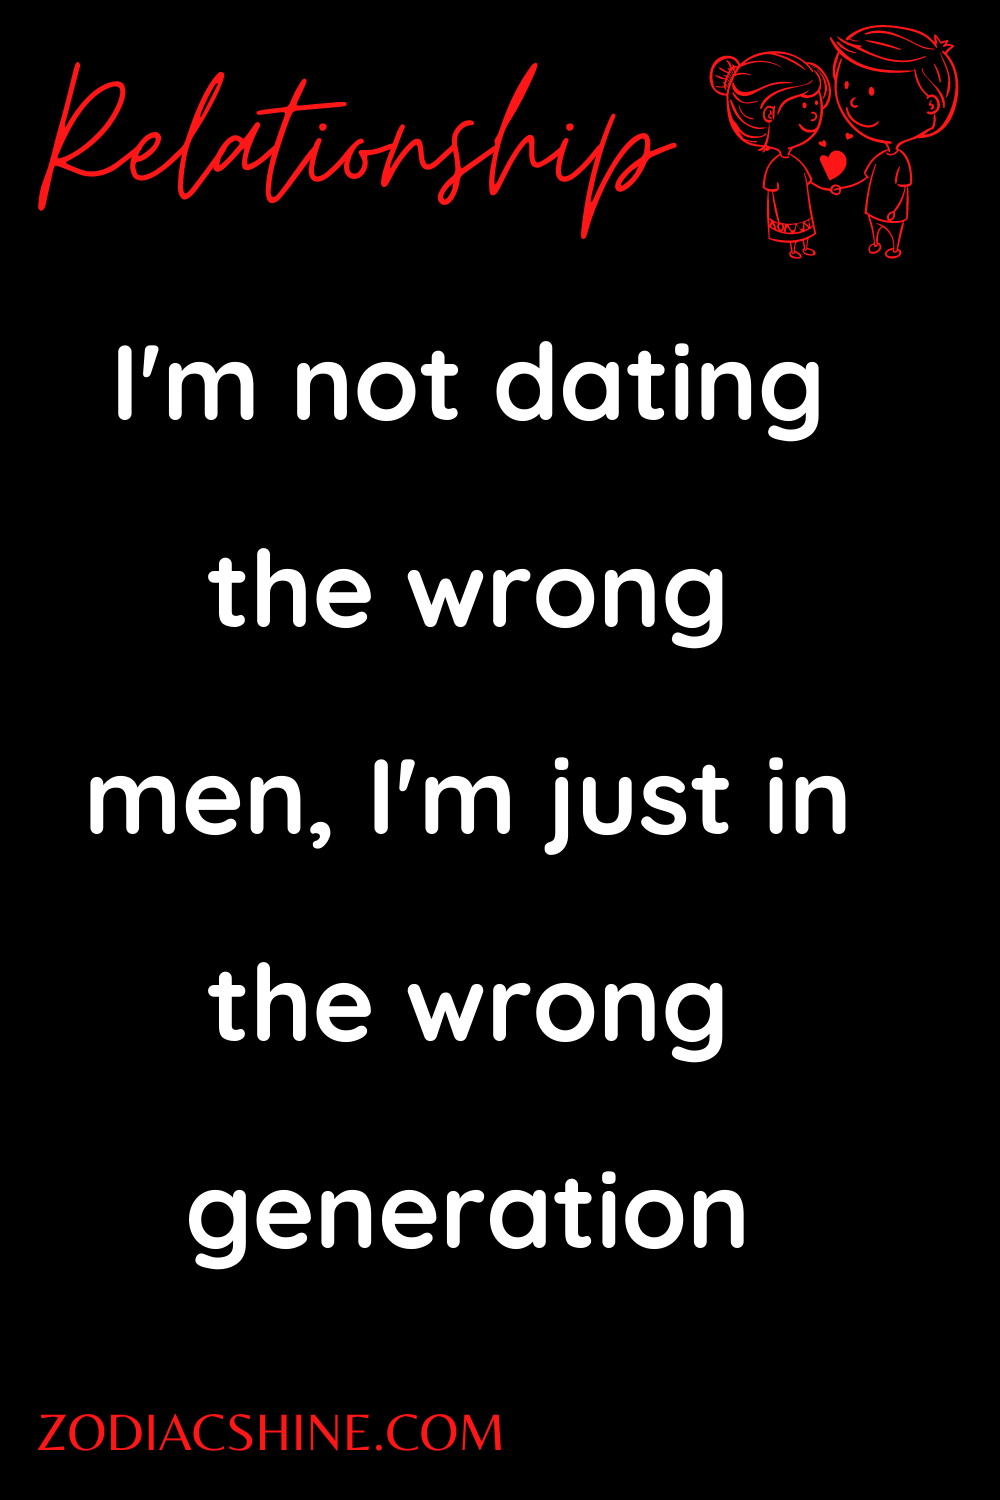 I'm not dating the wrong men, I'm just in the wrong generation